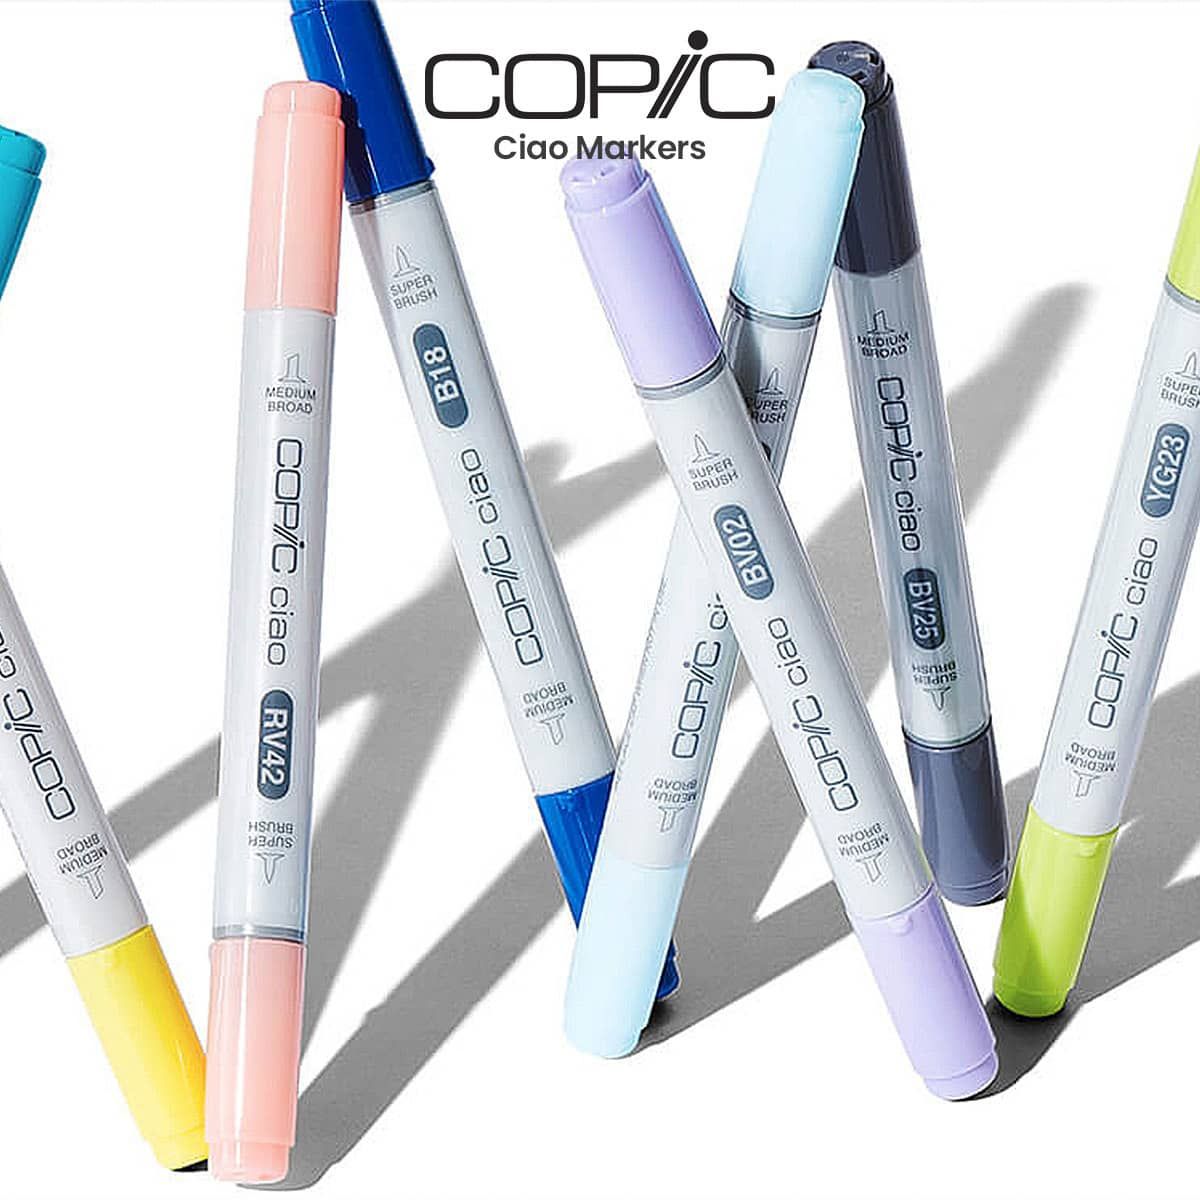 Copic Marker Maintenance: How and When to Replace Worn Brush Nibs